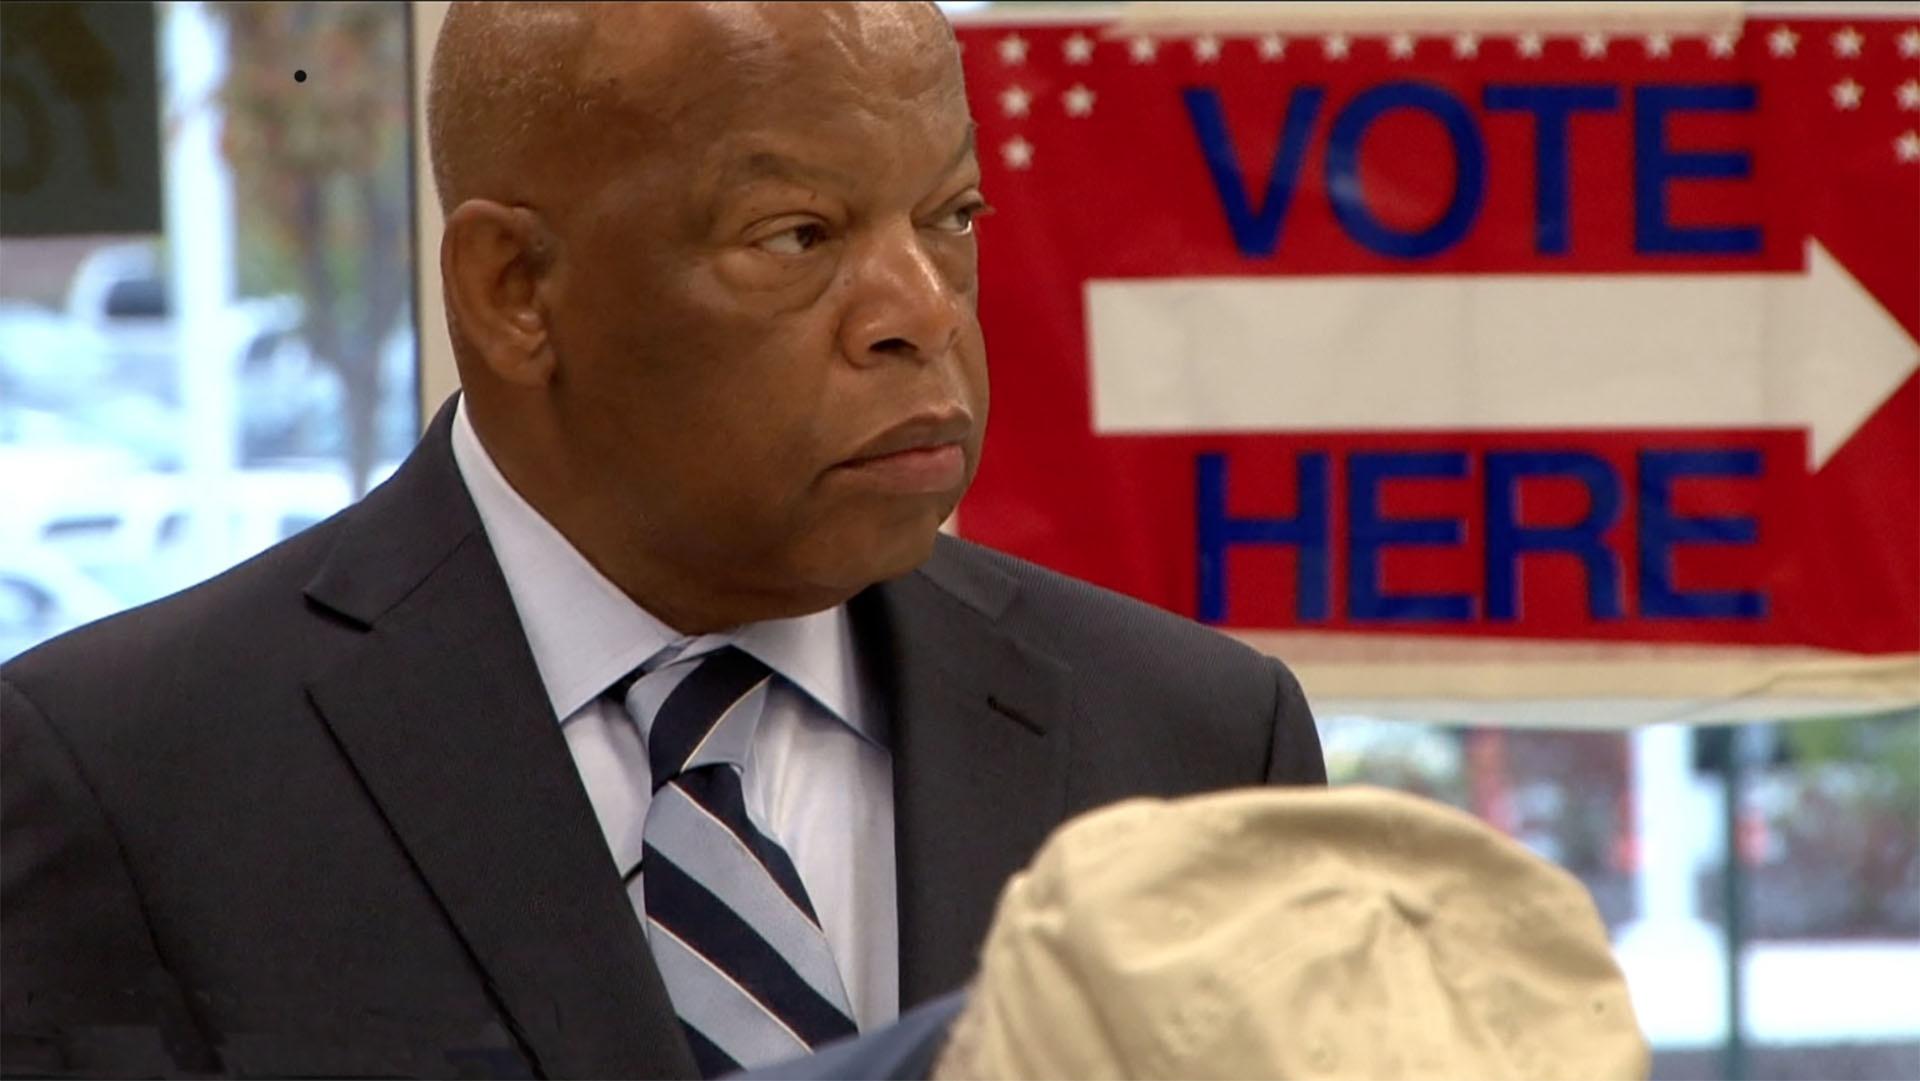 Lewis about to vote at his polling station in Atlanta, GA.